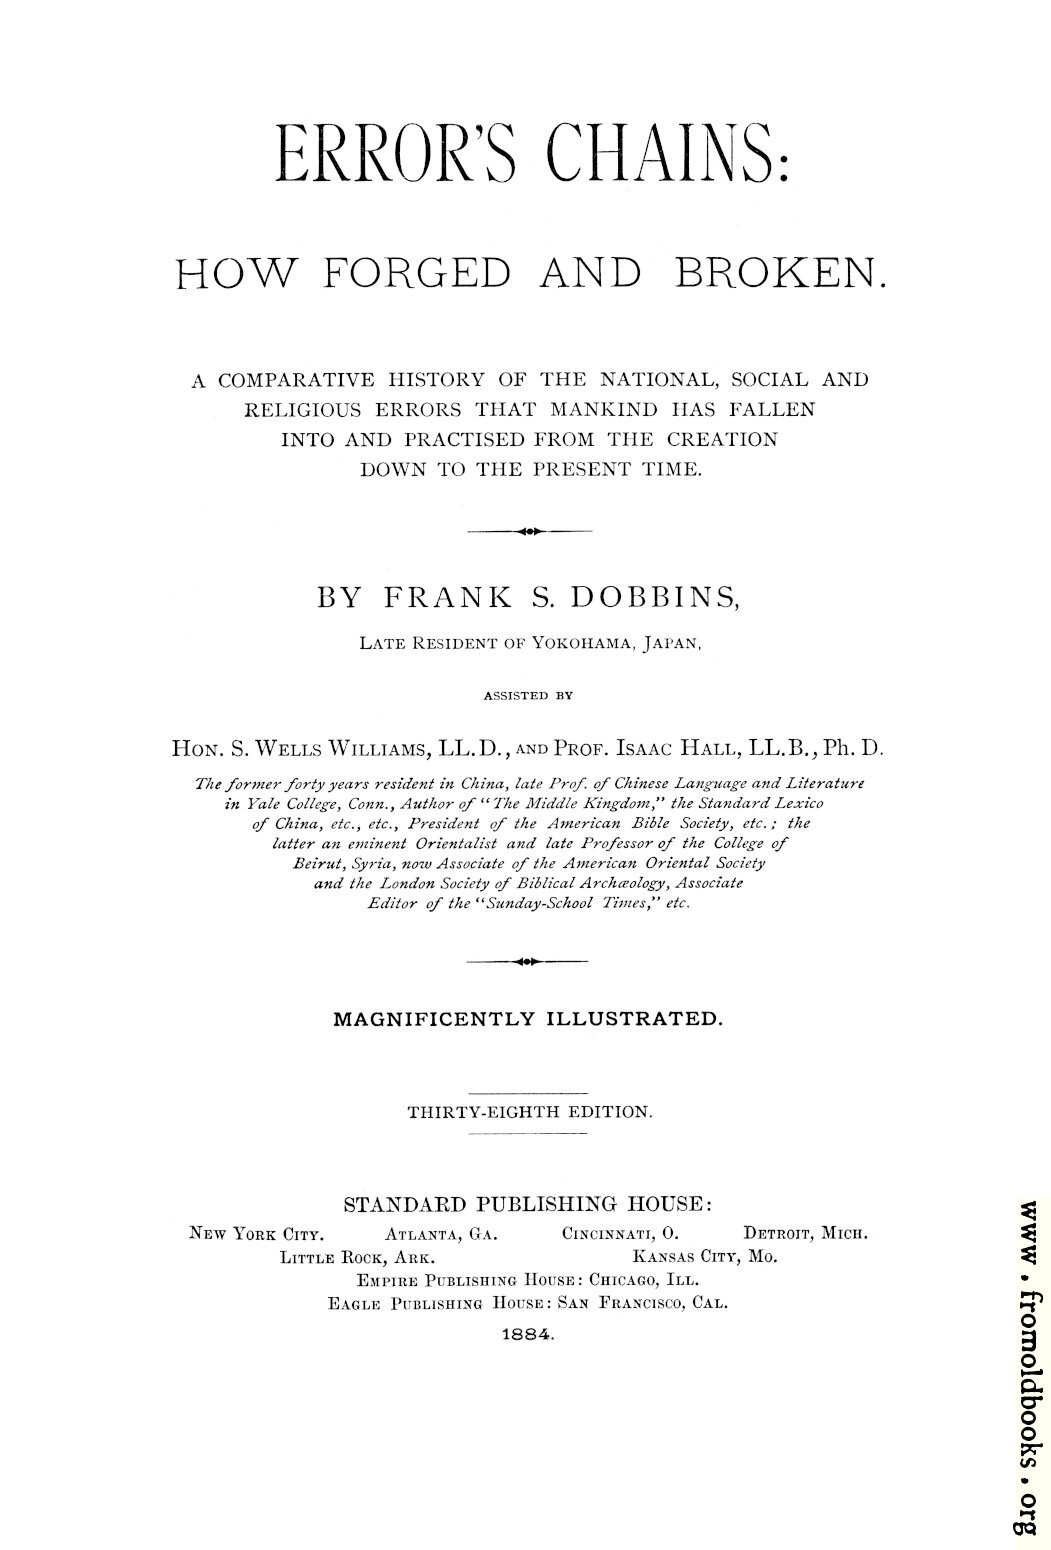 [Picture: Title Page, Error’s Chains]